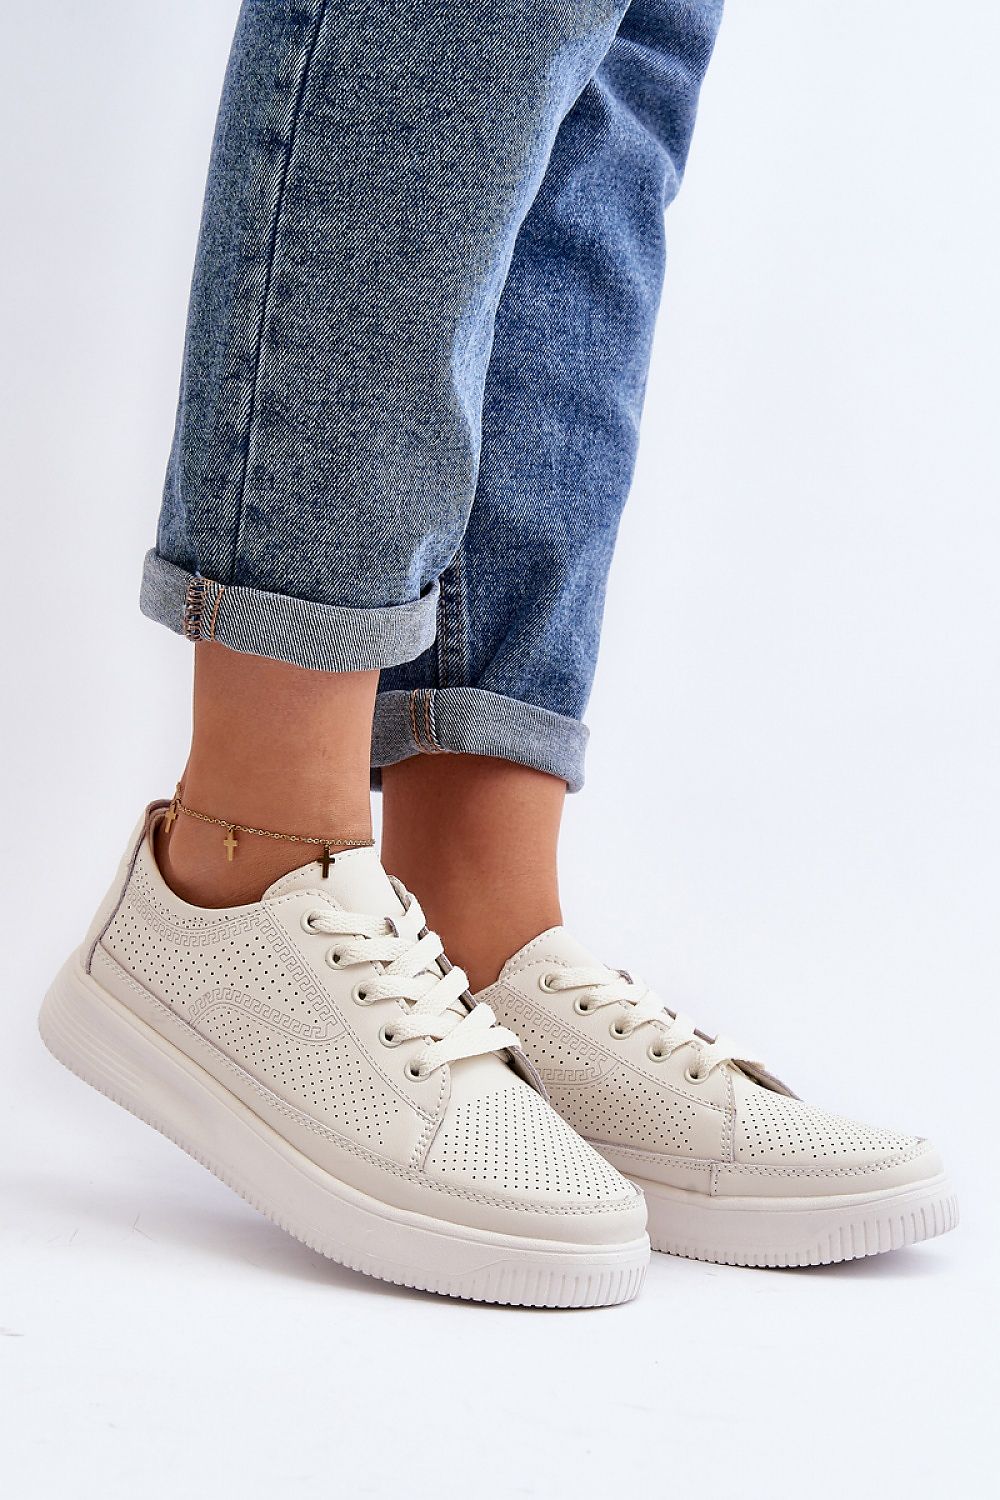 Cream Everyday Natural Leather Trainers - US 5.5 - Sport Finesse